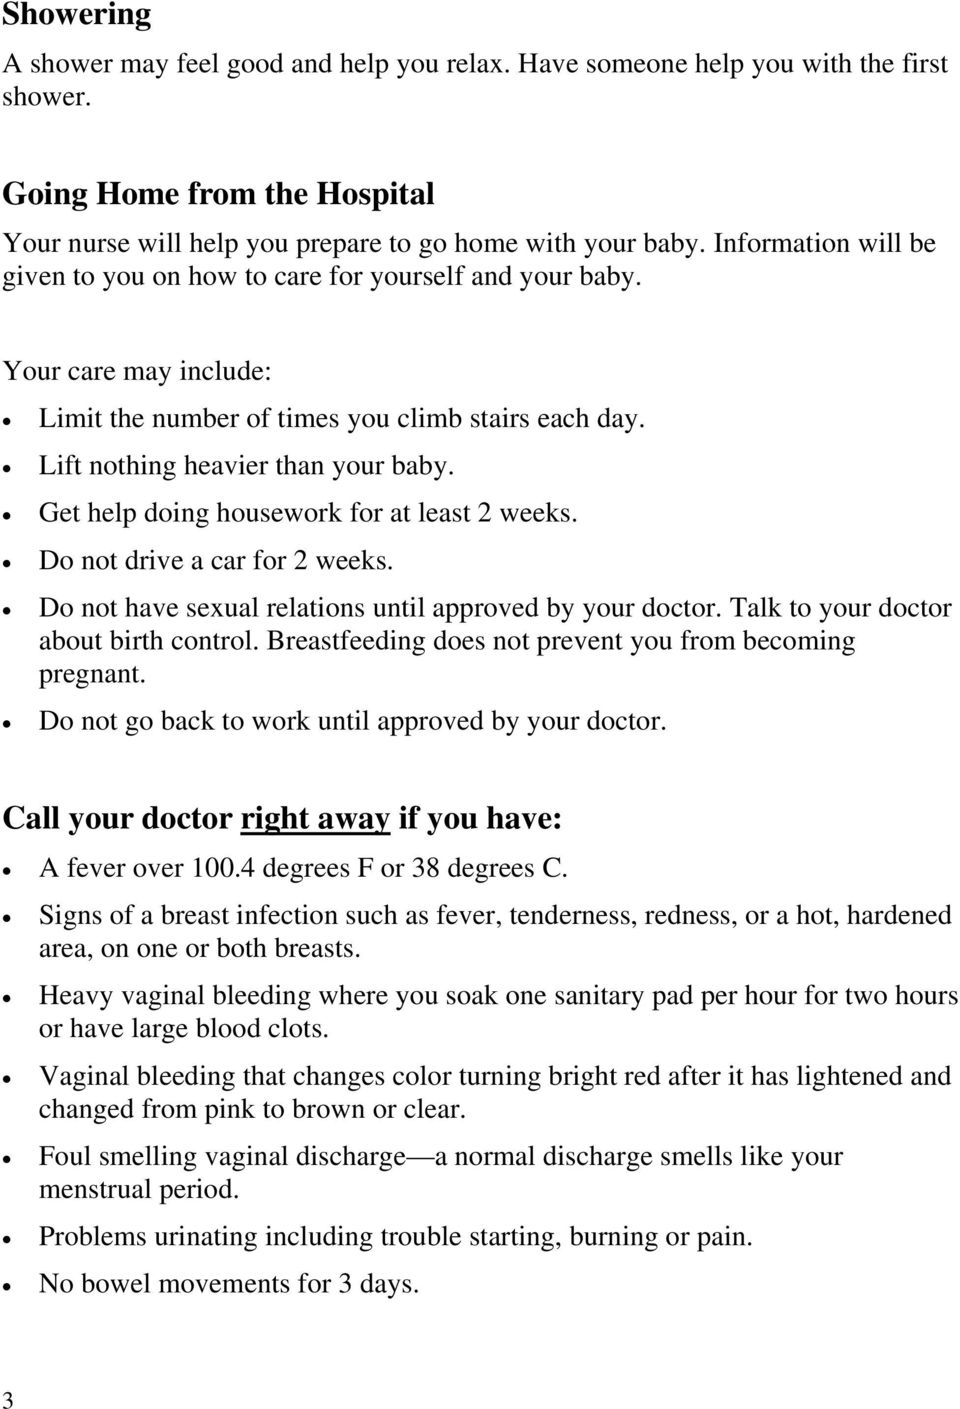 Get help doing housework for at least 2 weeks. Do not drive a car for 2 weeks. Do not have sexual relations until approved by your doctor. Talk to your doctor about birth control.